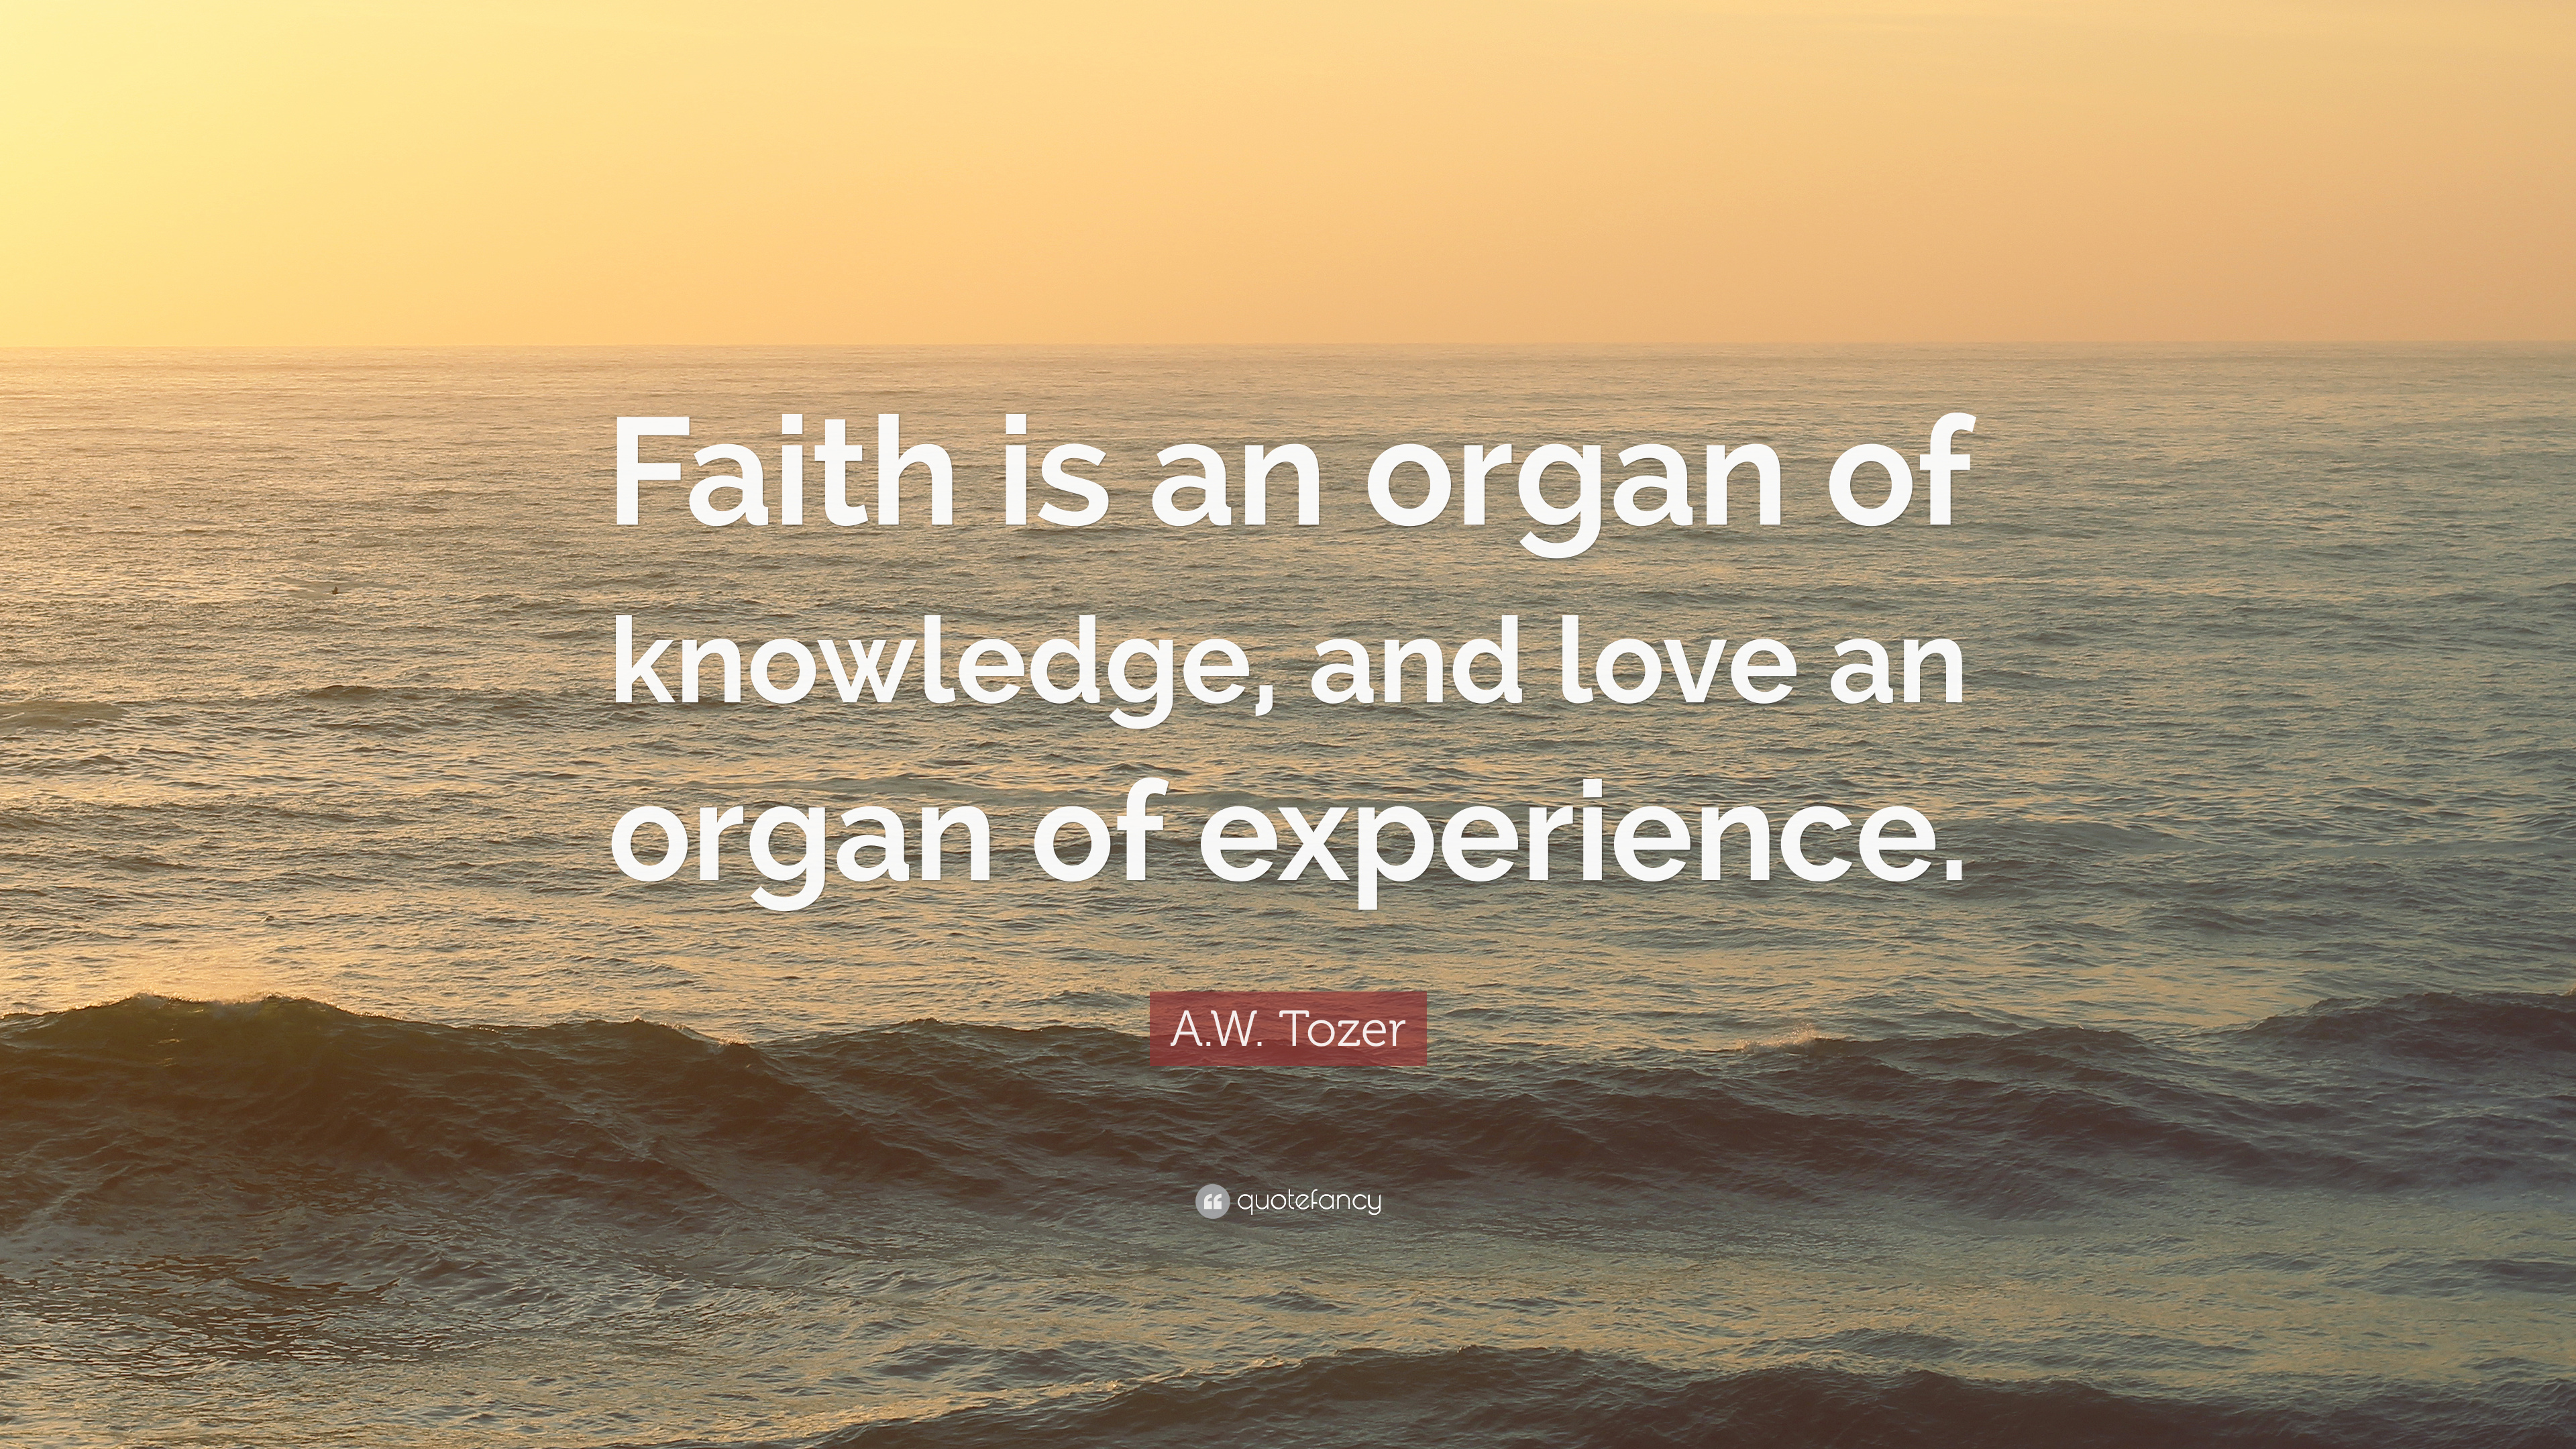 4950733-A-W-Tozer-Quote-Faith-is-an-organ-of-knowledge-and-love-an-organ.jpg